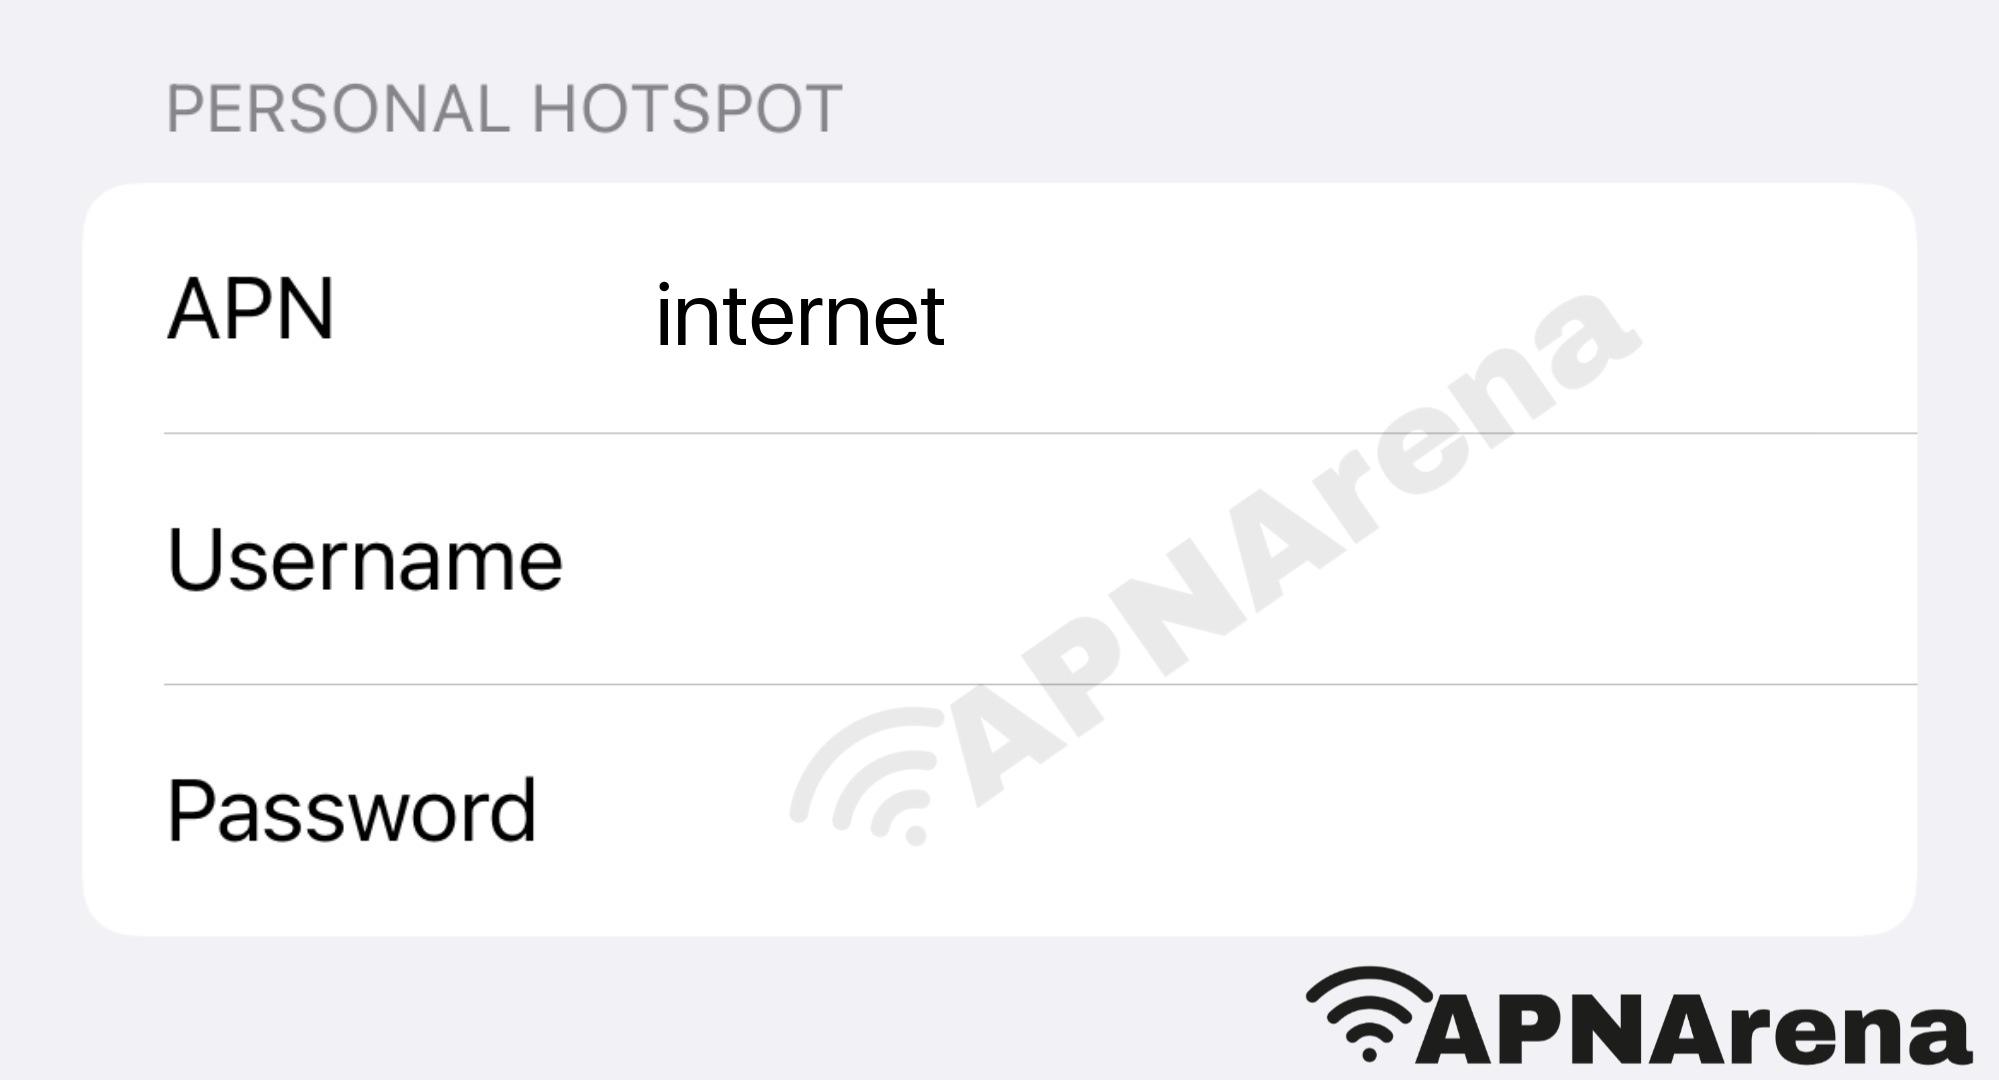 Virgin Mobile Poland Personal Hotspot Settings for iPhone